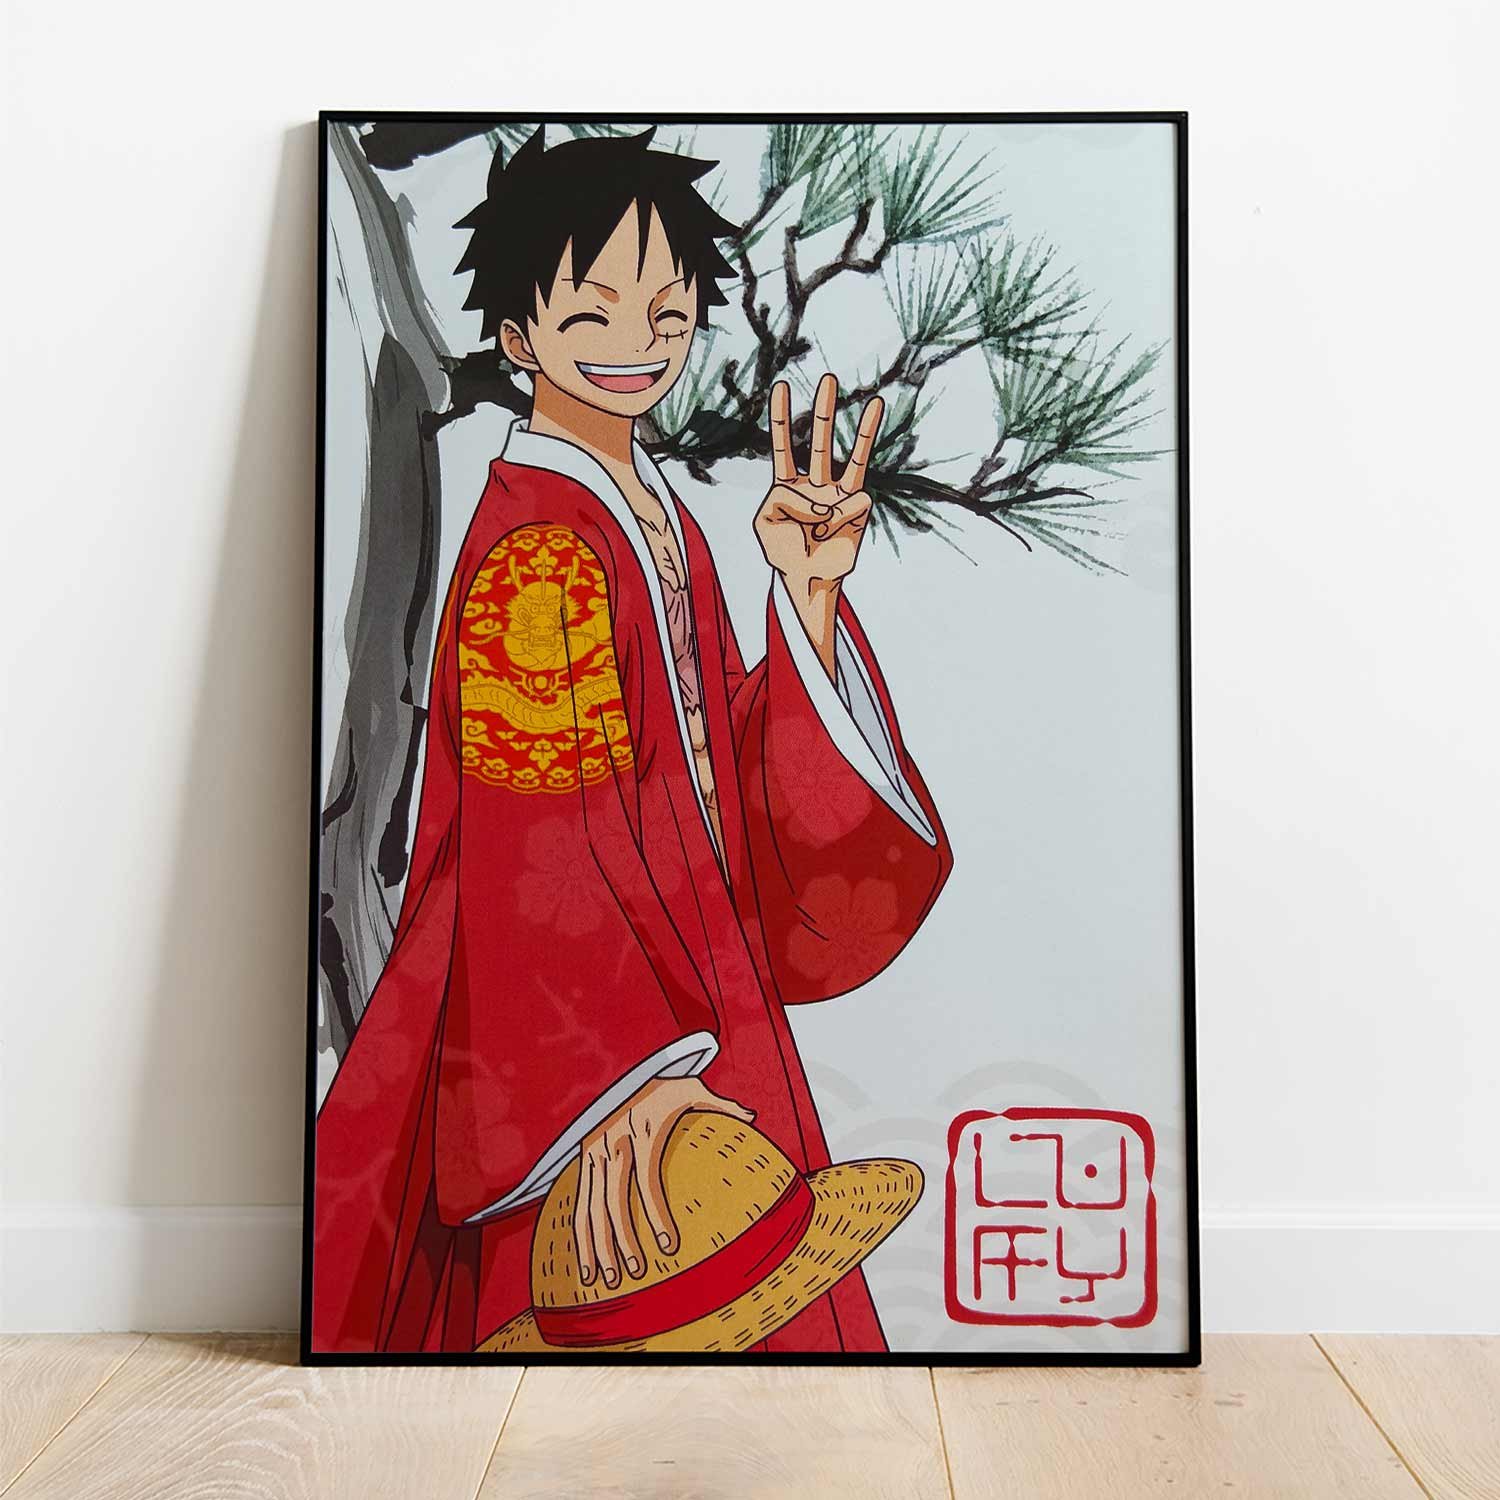 One Piece Monkey D. Luffy Wanted Poster - Merch Fuse